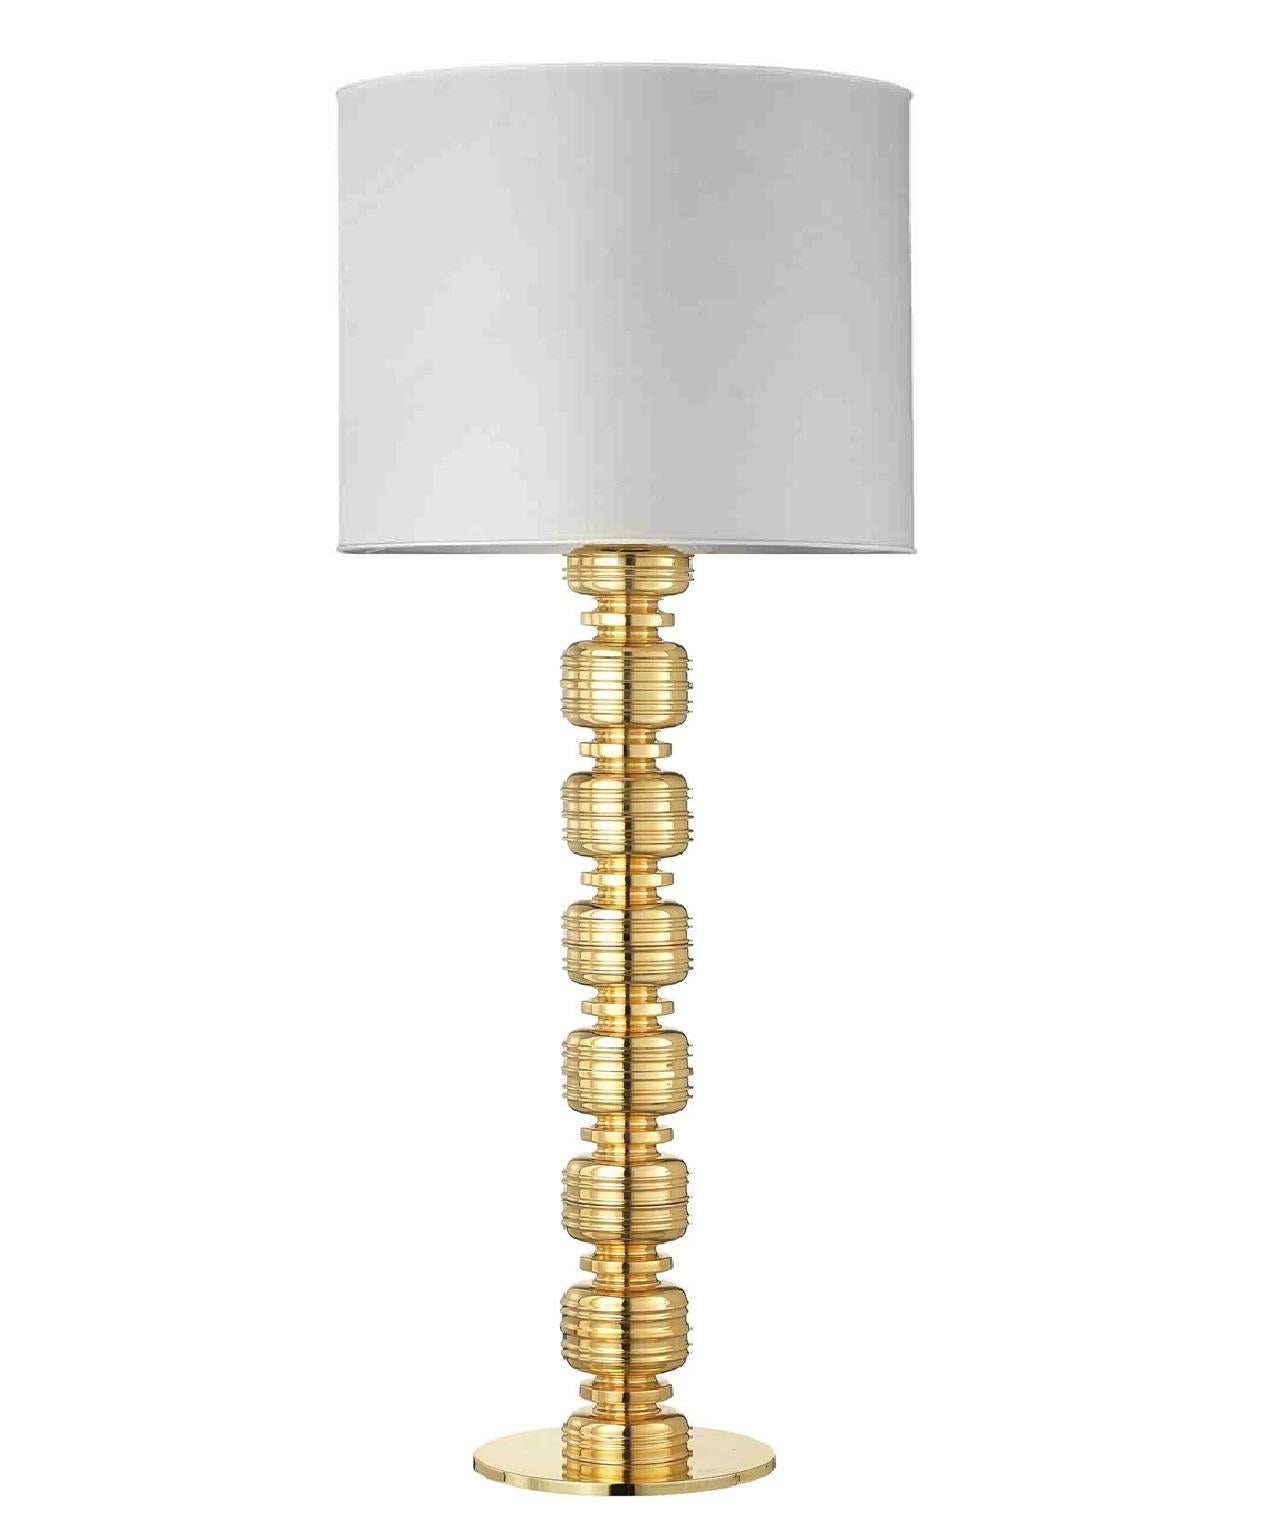 Italian THEA 3, Ceramic Lamp Handcrafted in 24-Karat Gold by Gabriella B. Made in Italy For Sale